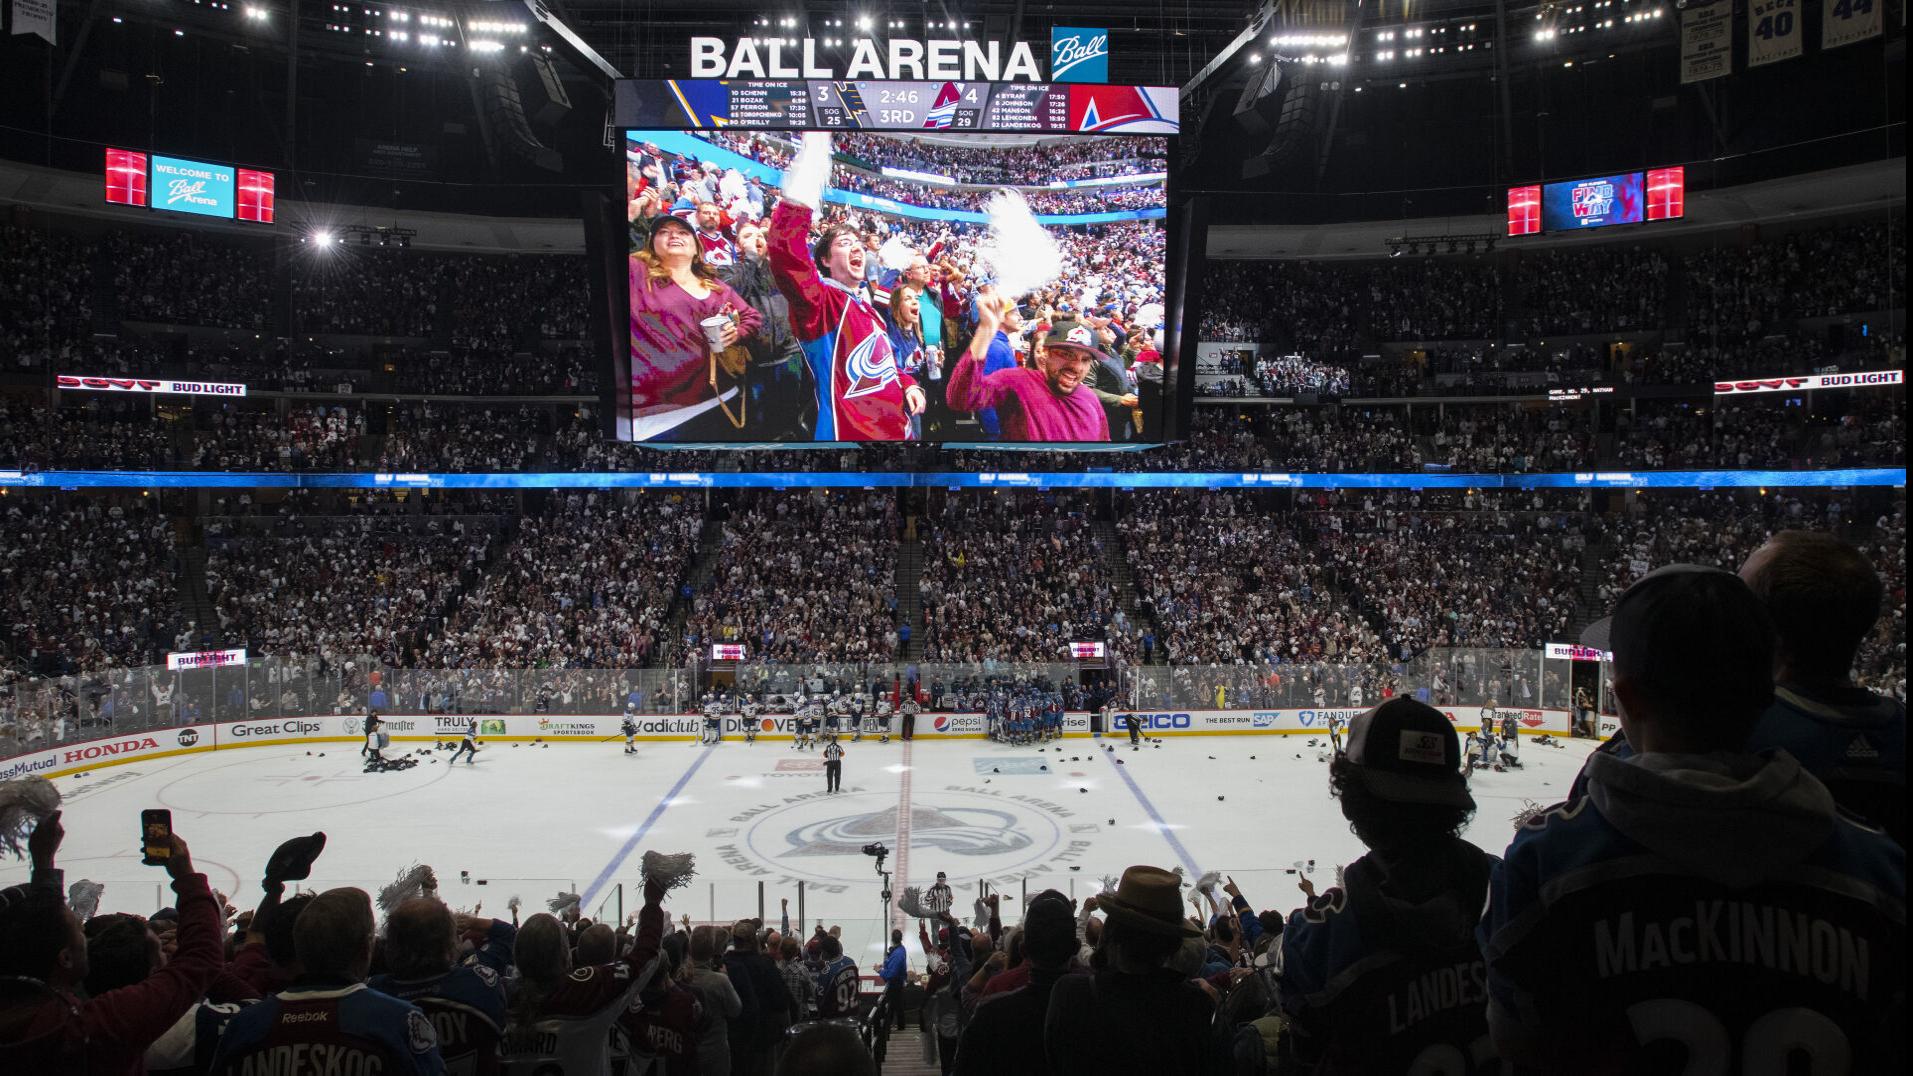 We can't wait to see these Stadium - Colorado Avalanche